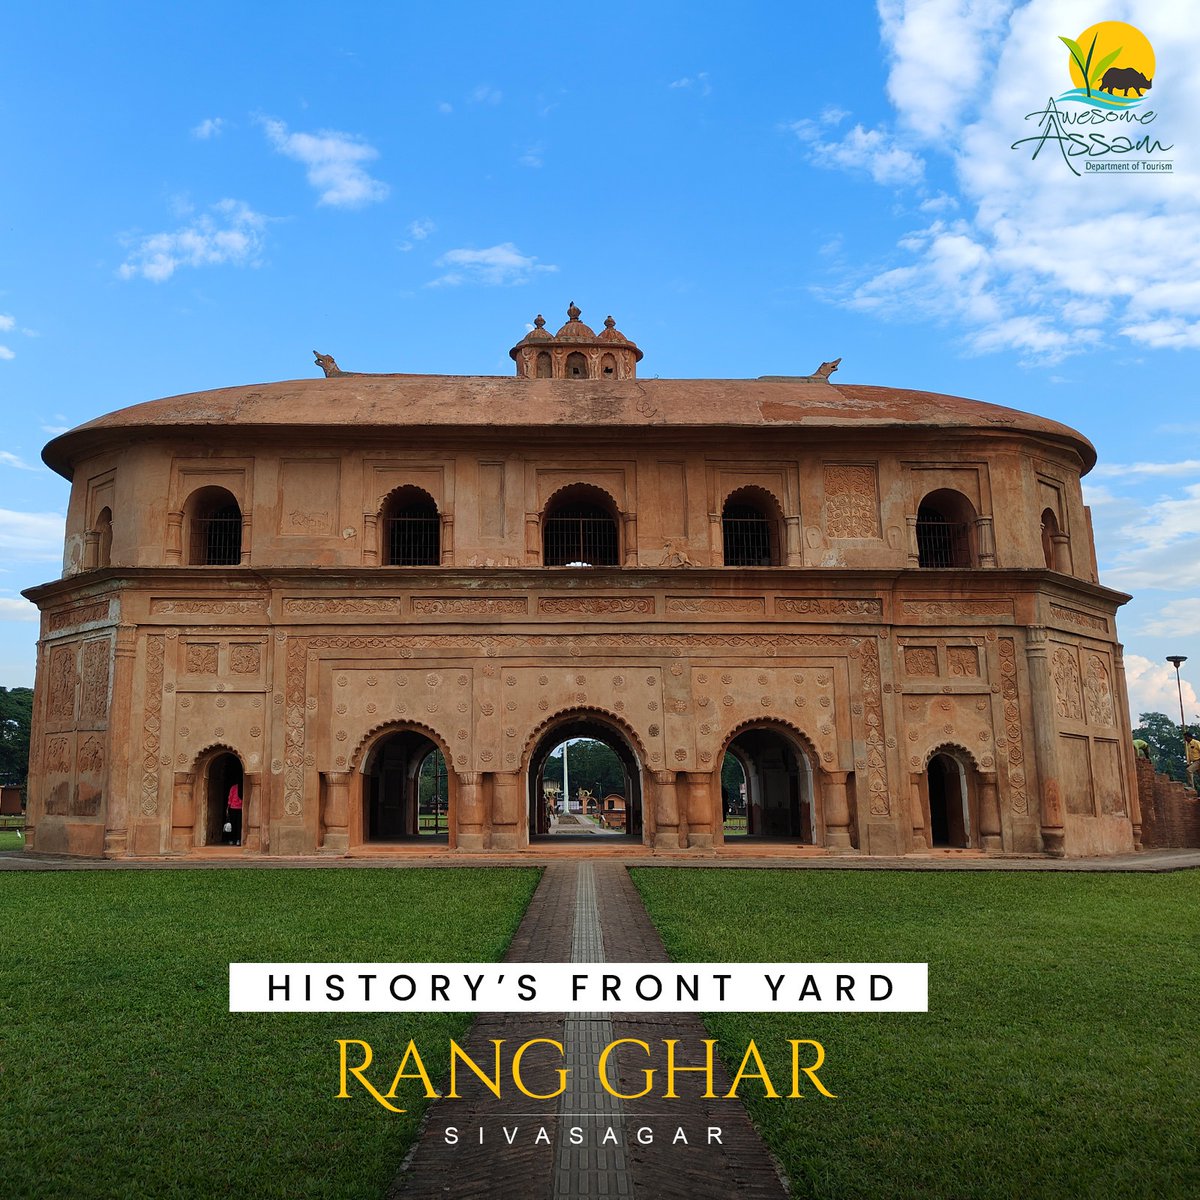 The oldest surviving amphitheatre in Asia which saw history unfold in its front yard.
Ranghar is one of the most important Ahom Era monuments till today. 

#AwesomeAssam
#RangGhar
#AhomEra
#History
#AssamHistory
#IndianHistory